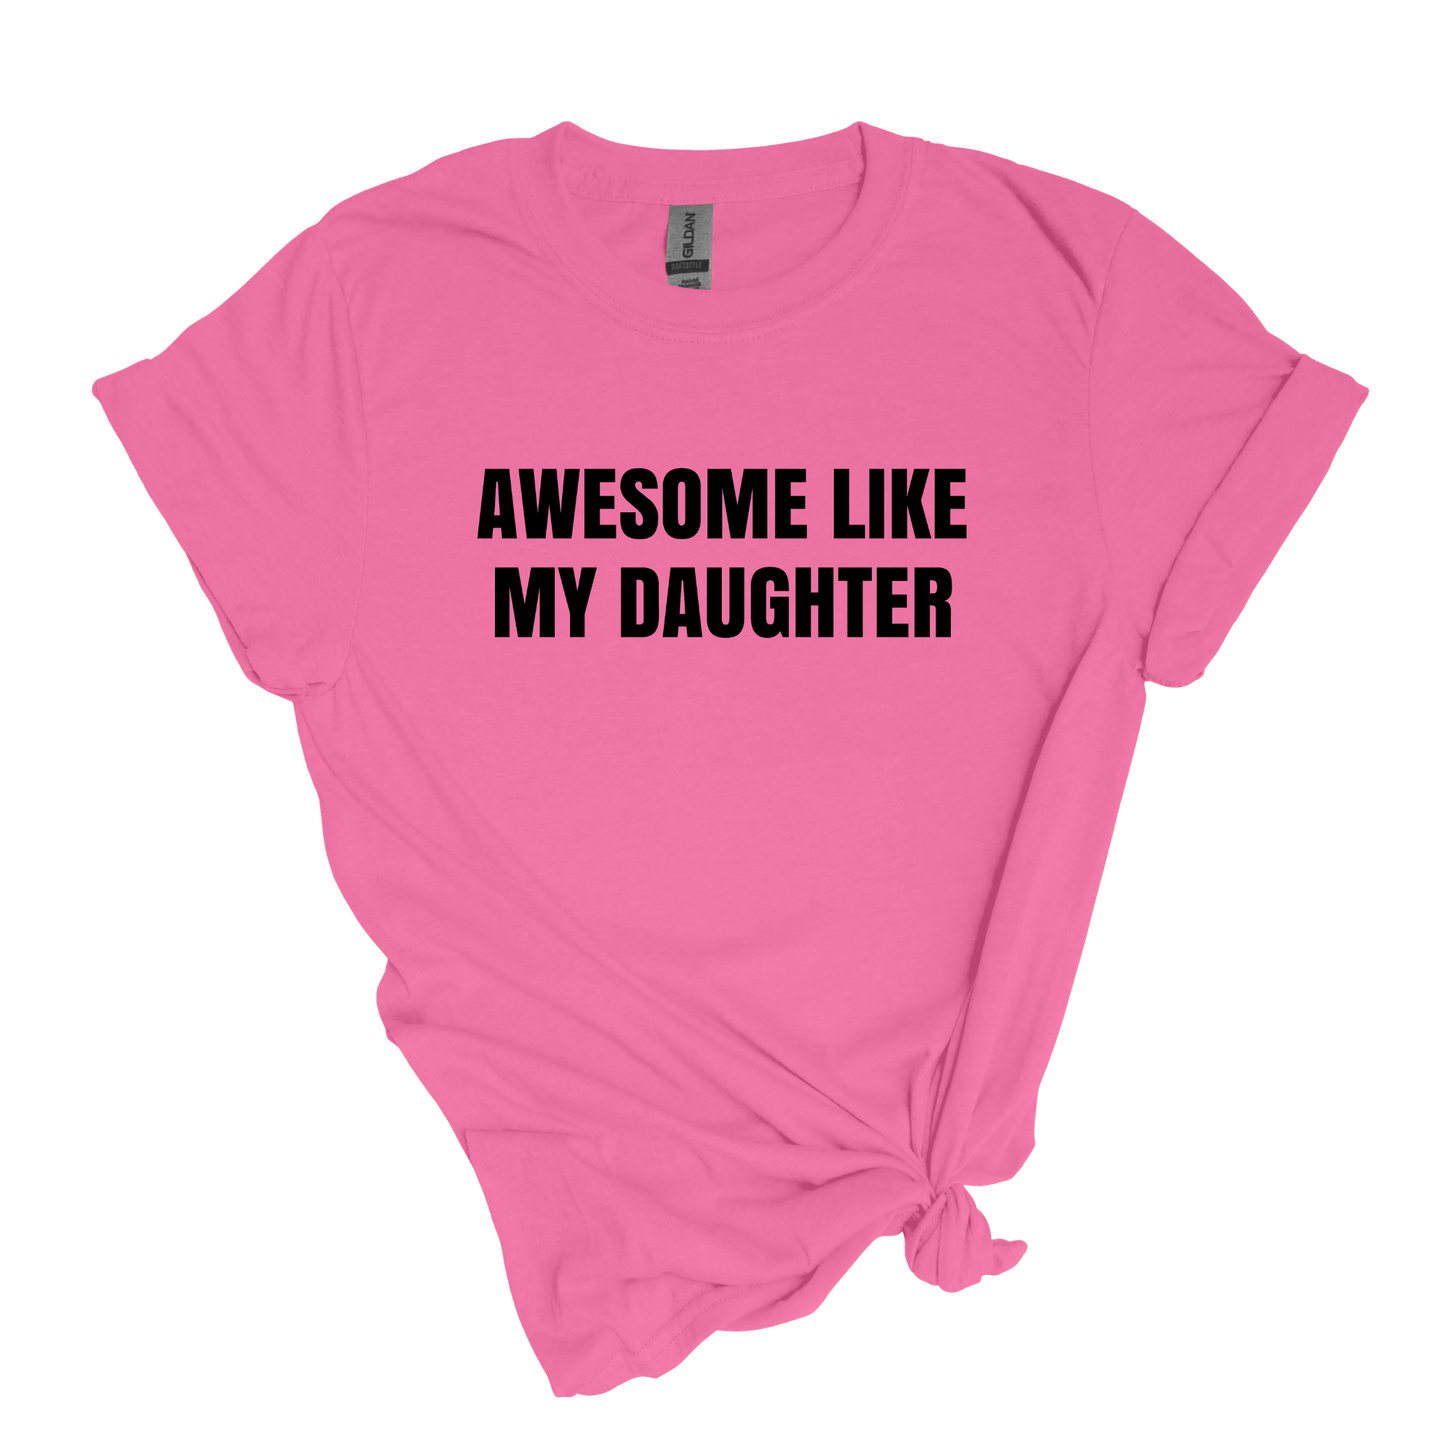 Awesome Like My Daughter - Adult Unisex Soft T-shirt